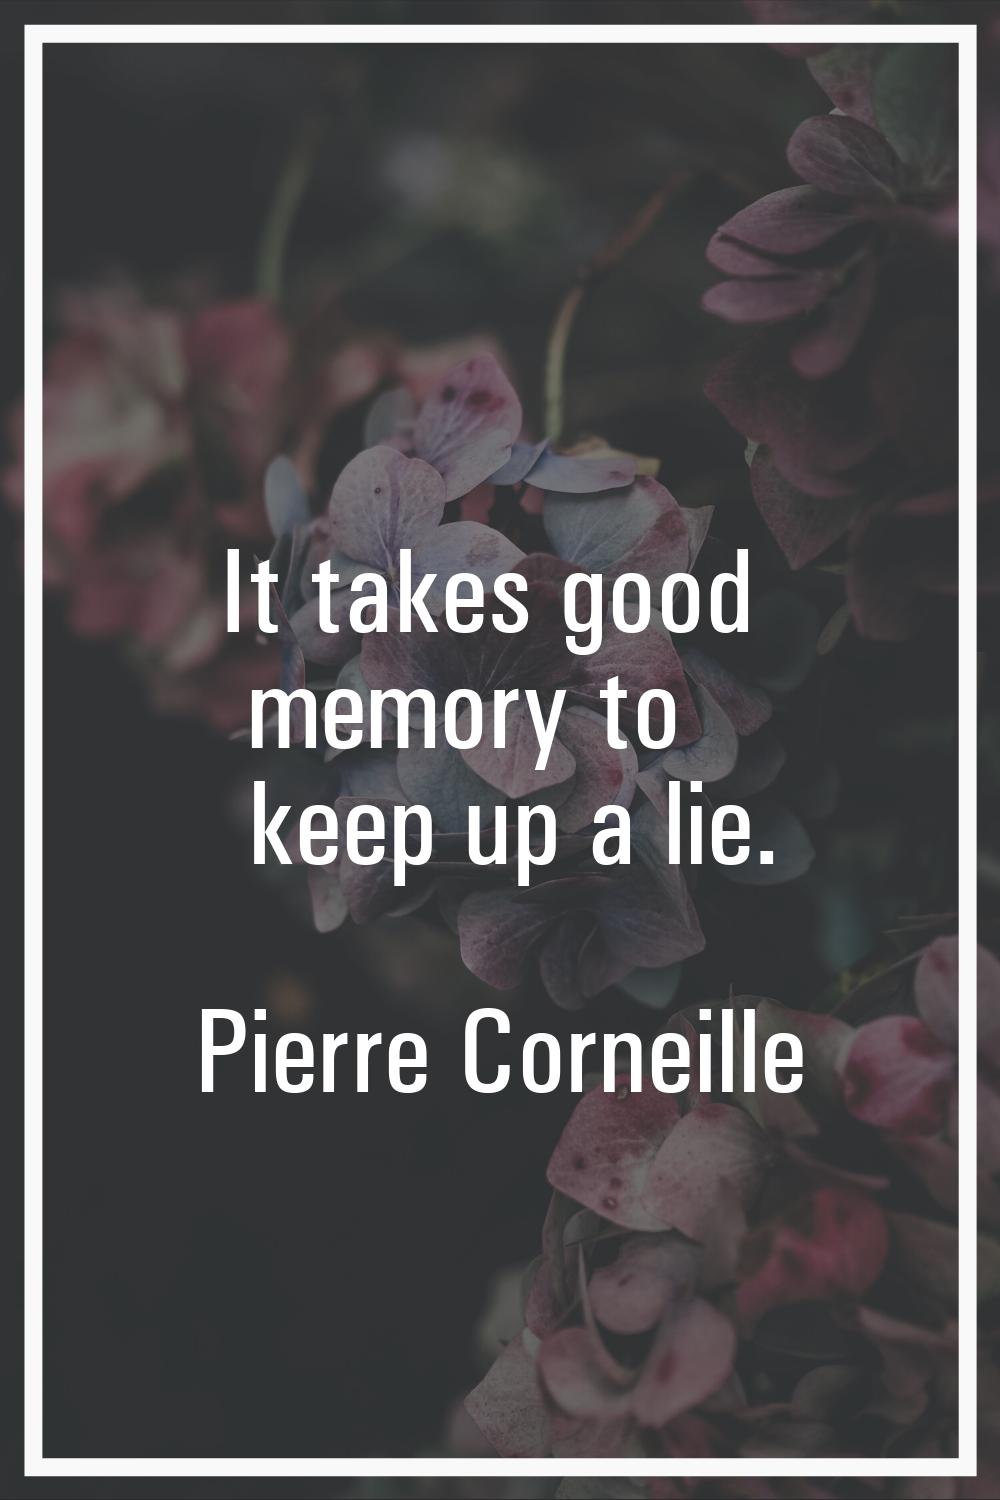 It takes good memory to keep up a lie.